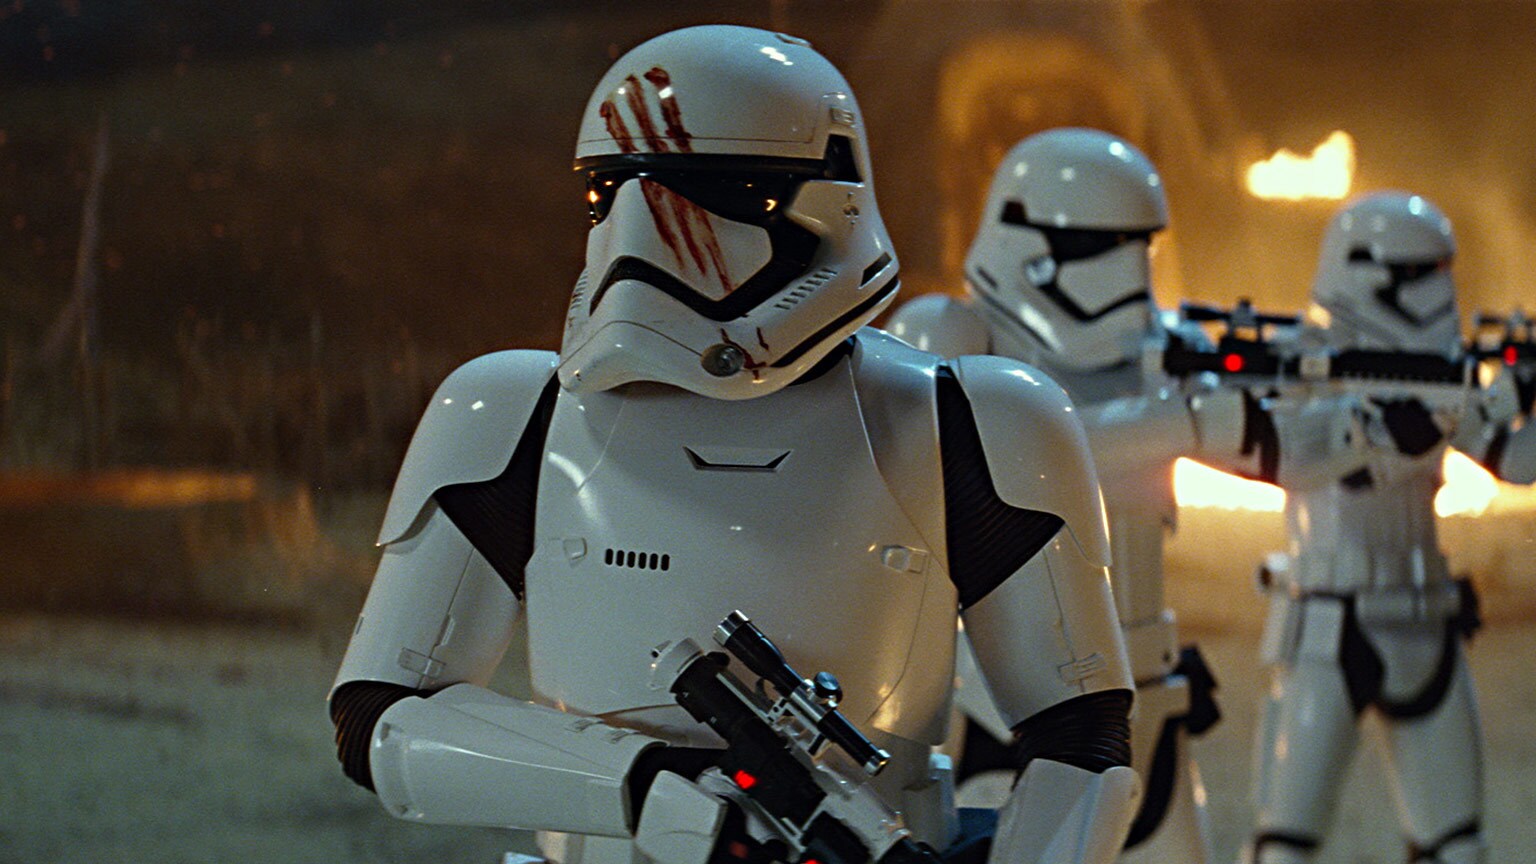 From a Certain Point of View: What Star Wars Movie Would You Pick to Introduce Someone to the Galaxy? 